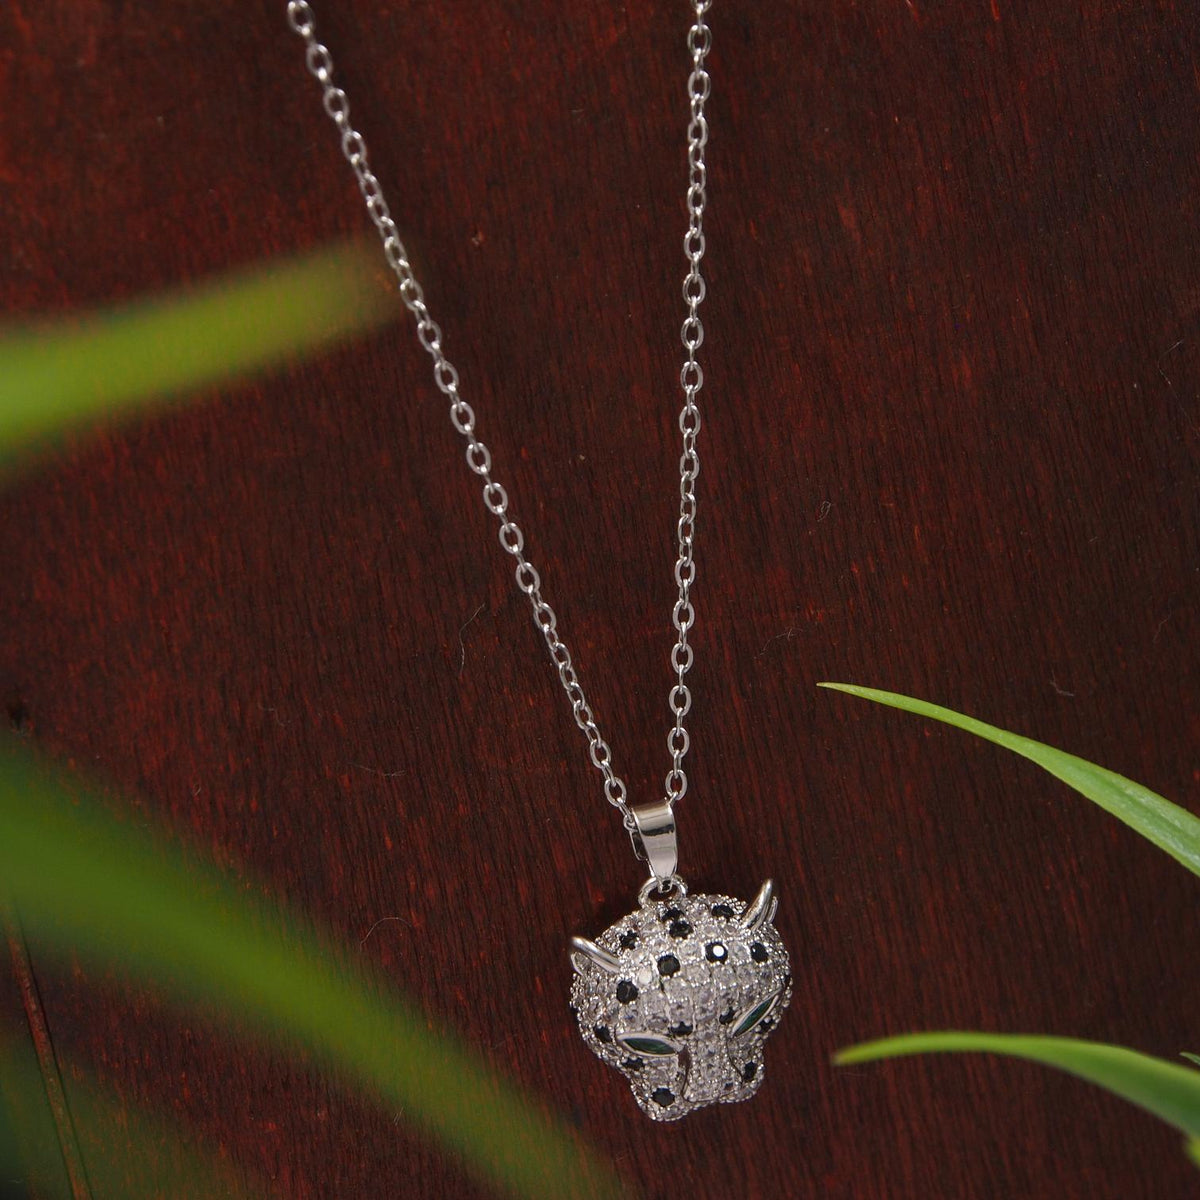 Stainless Steel Leopard Head Pendent Chain Necklace - STNK 4999